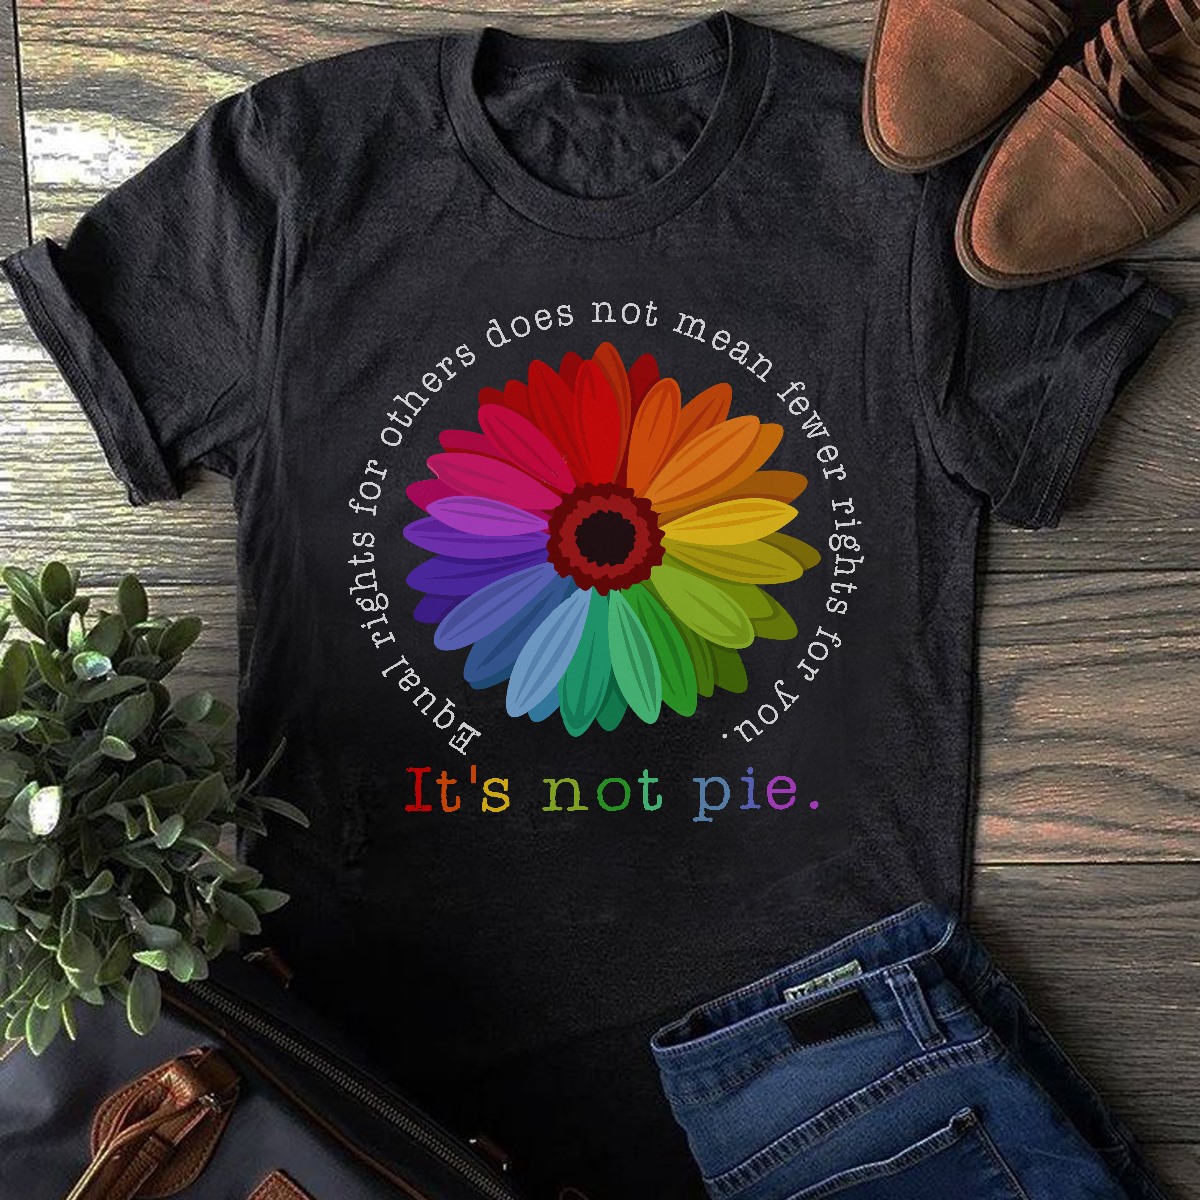 Equal rights for others does not mean fewer right for you - It's not pie, lgbt community